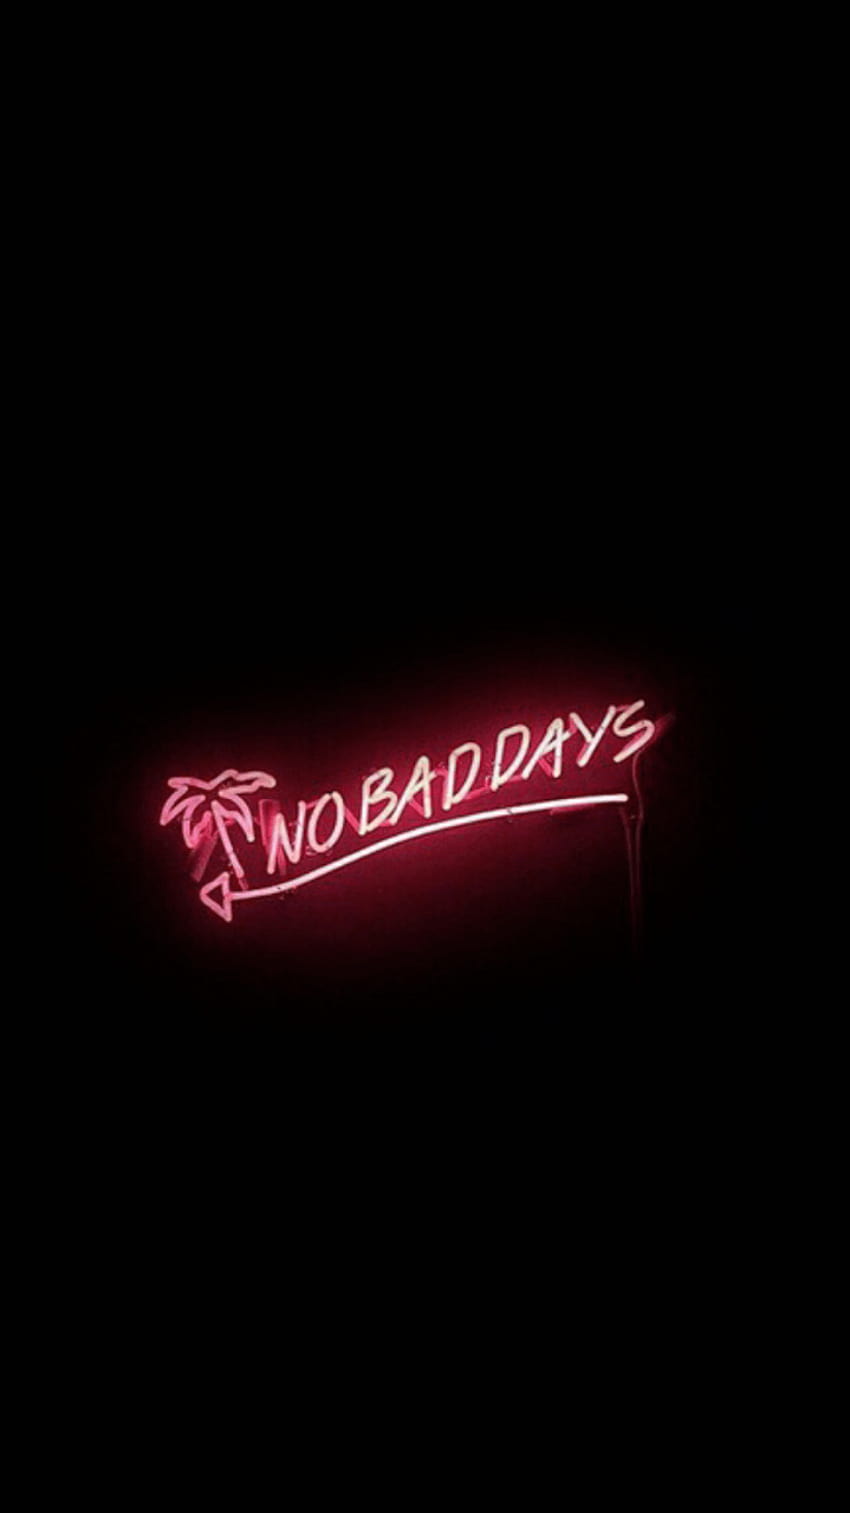 No bad days neon sign wallpaper background phone background wallpaper no bad days neon sign wallpaper background phone background wallpaper - Neon red